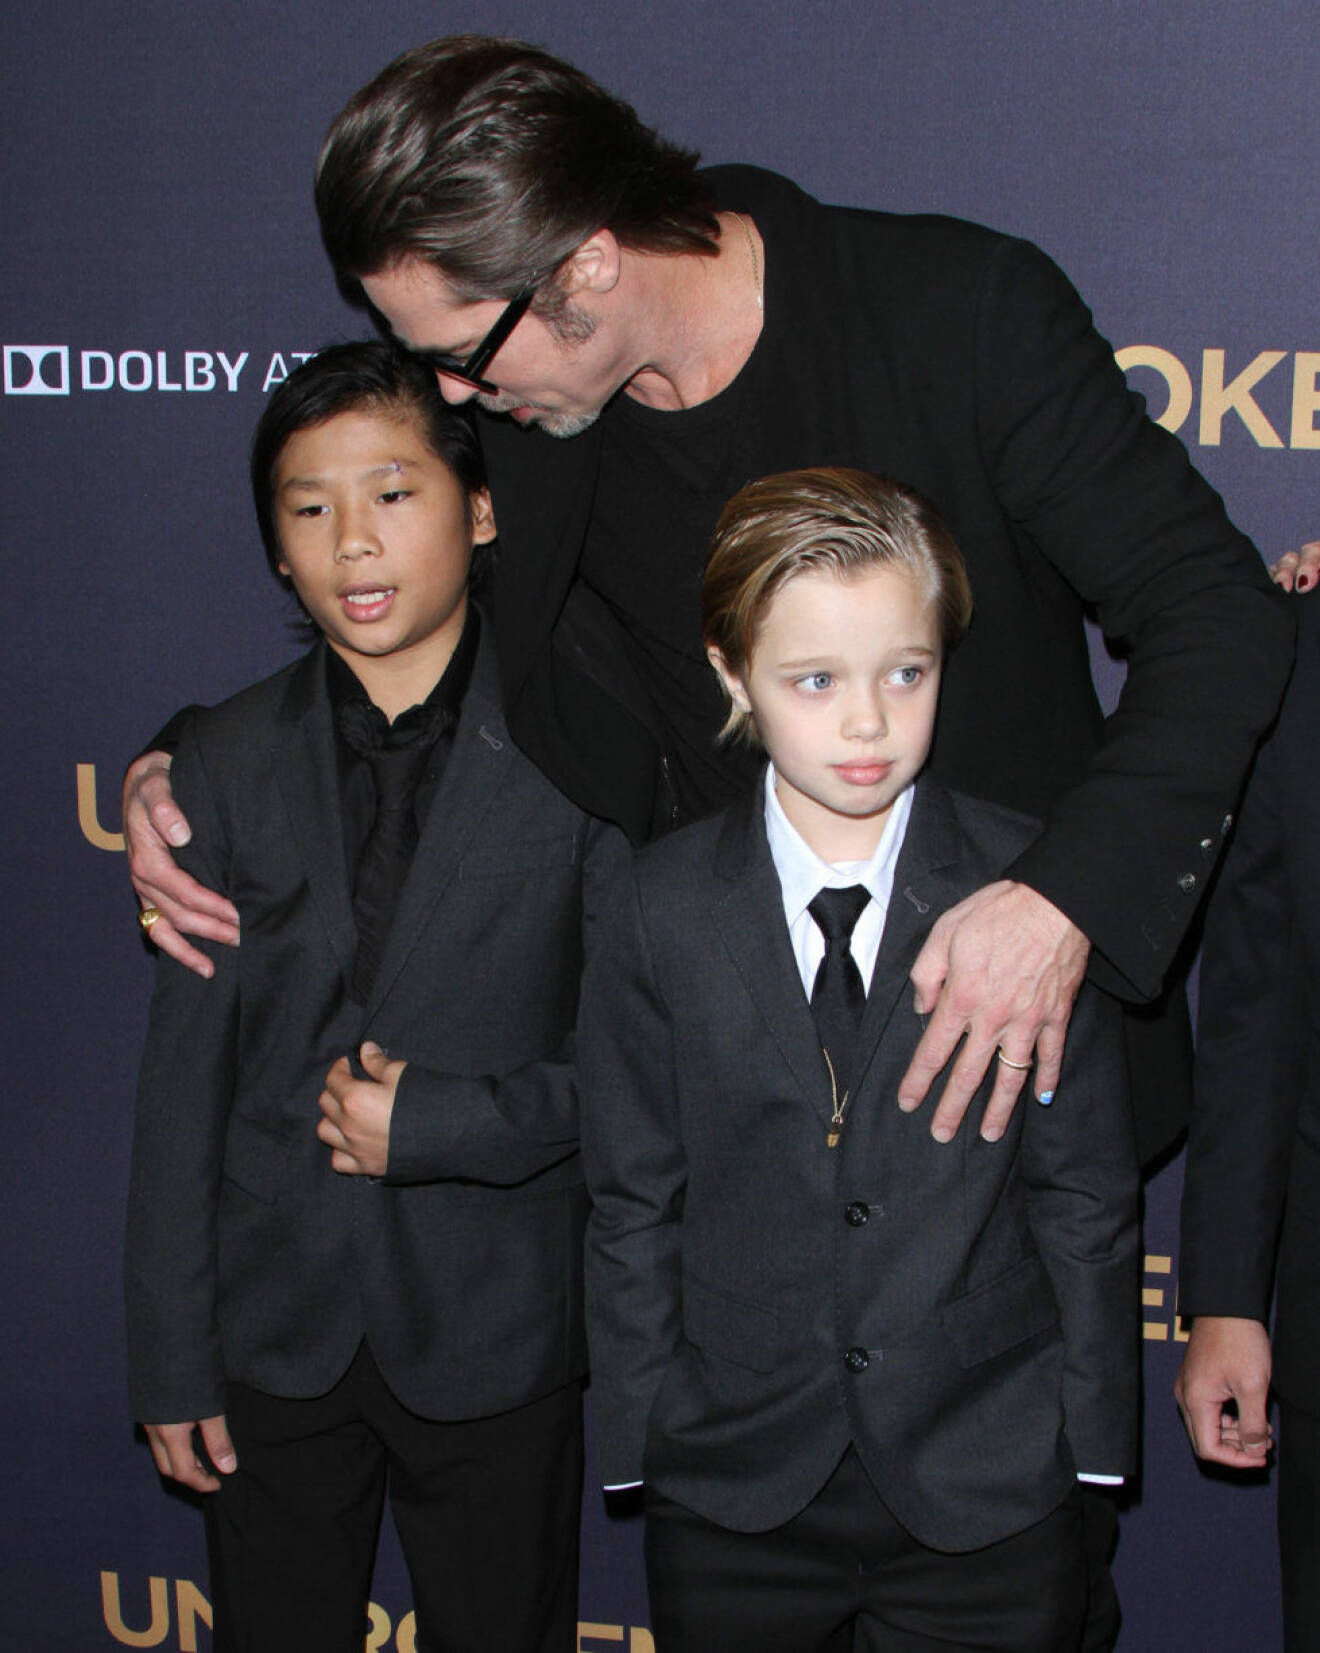 "Unbroken" Los Angeles Premiere held at TCL Chinese Theatre IMAX in Hollywood Featuring: Brad Pitt, Pax Thien Jolie-Pitt, Shiloh Nouvel Jolie-Pitt Where: Los Angeles, California, United States When: 16 Dec 2014 Credit: Adriana M. Barraza/WENN.com